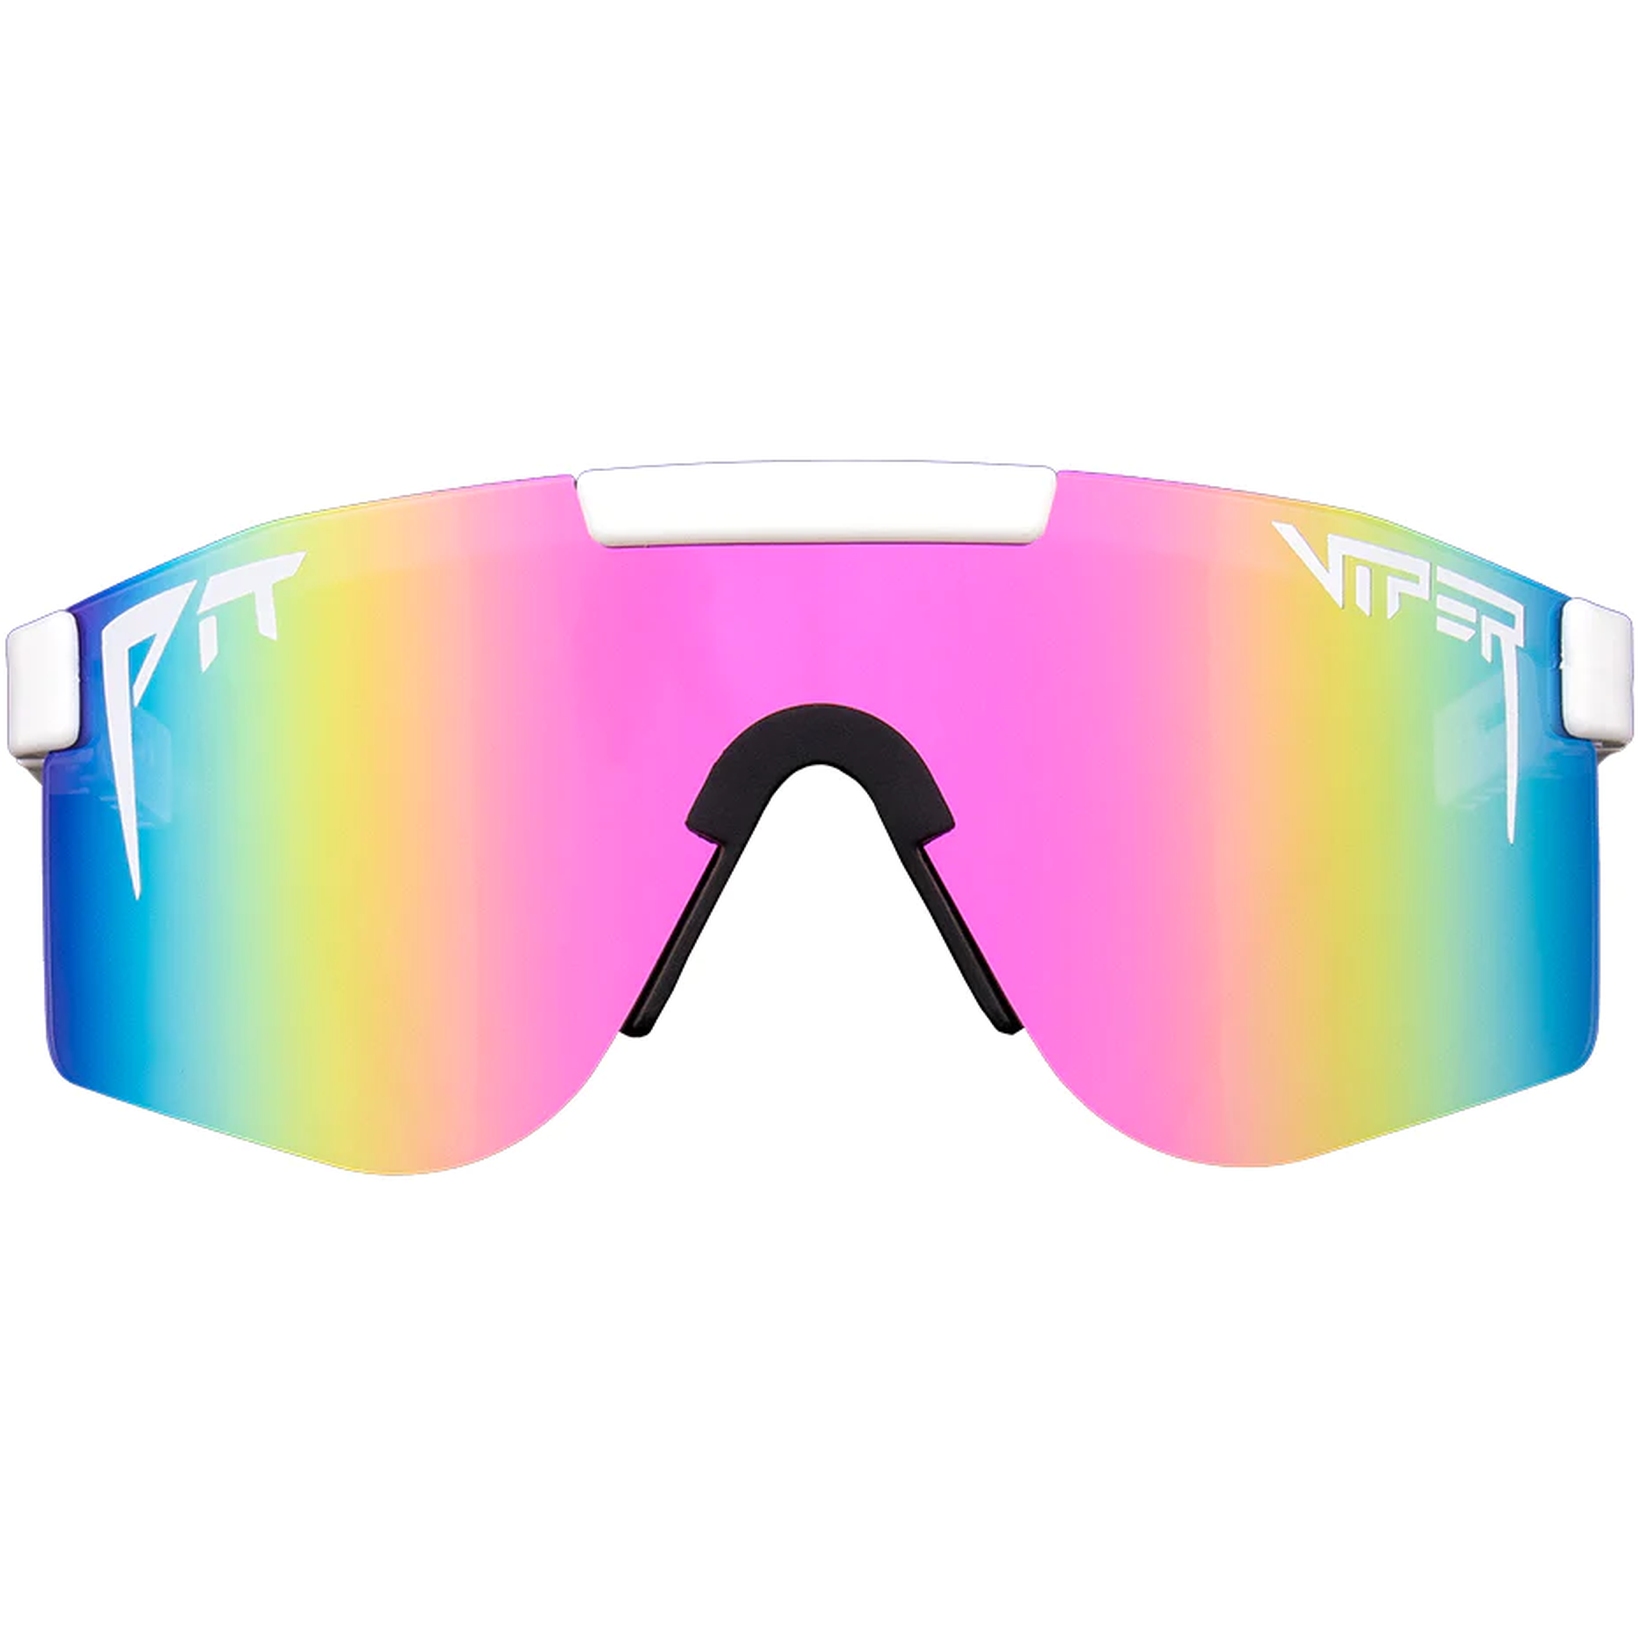 Productfoto van Pit Viper The Originals Glasses - Double Wide - The Miami Nights / Mirror Smoke to Clear Fade